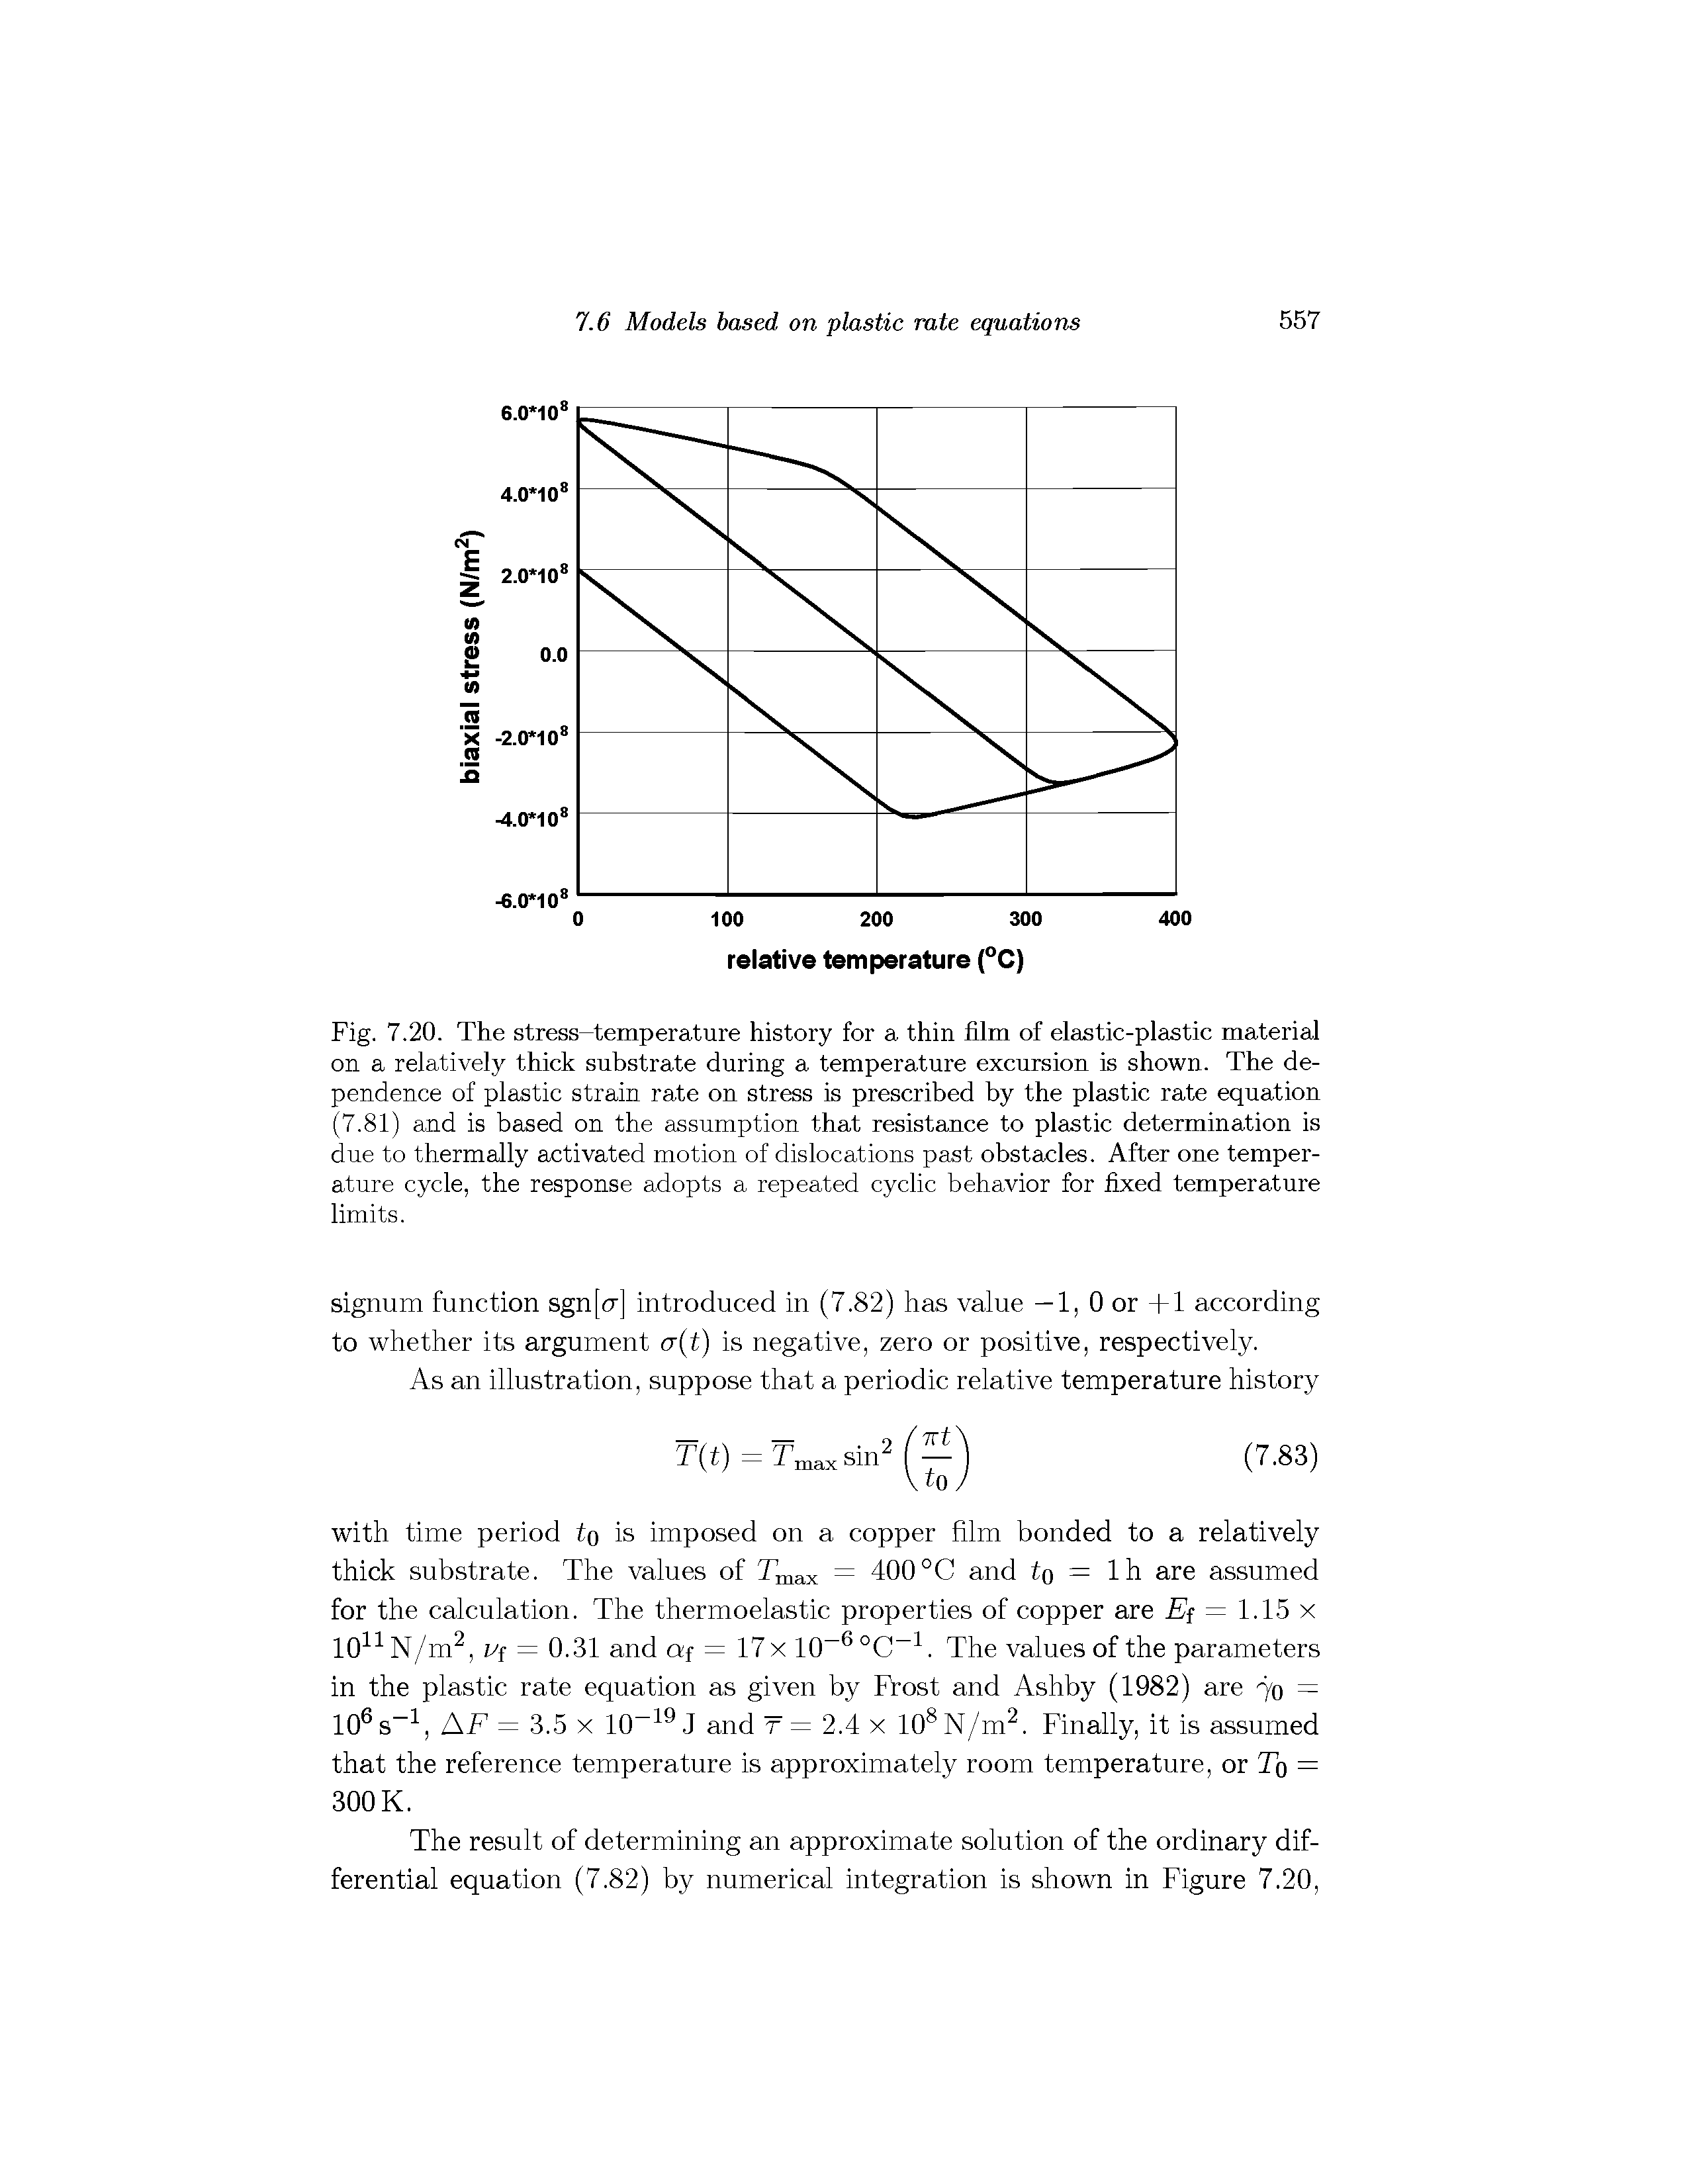 Fig. 7.20. The stress-temperature history for a thin film of elastic-plastic material on a relatively thick substrate during a temperature excursion is shown. The dependence of plastic strain rate on stress is prescribed by the plastic rate equation (7.81) and is based on the assumption that resistance to plastic determination is due to thermally activated motion of dislocations past obstacles. After one temperature cycle, the response adopts a repeated cyclic behavior for fixed temperature limits.